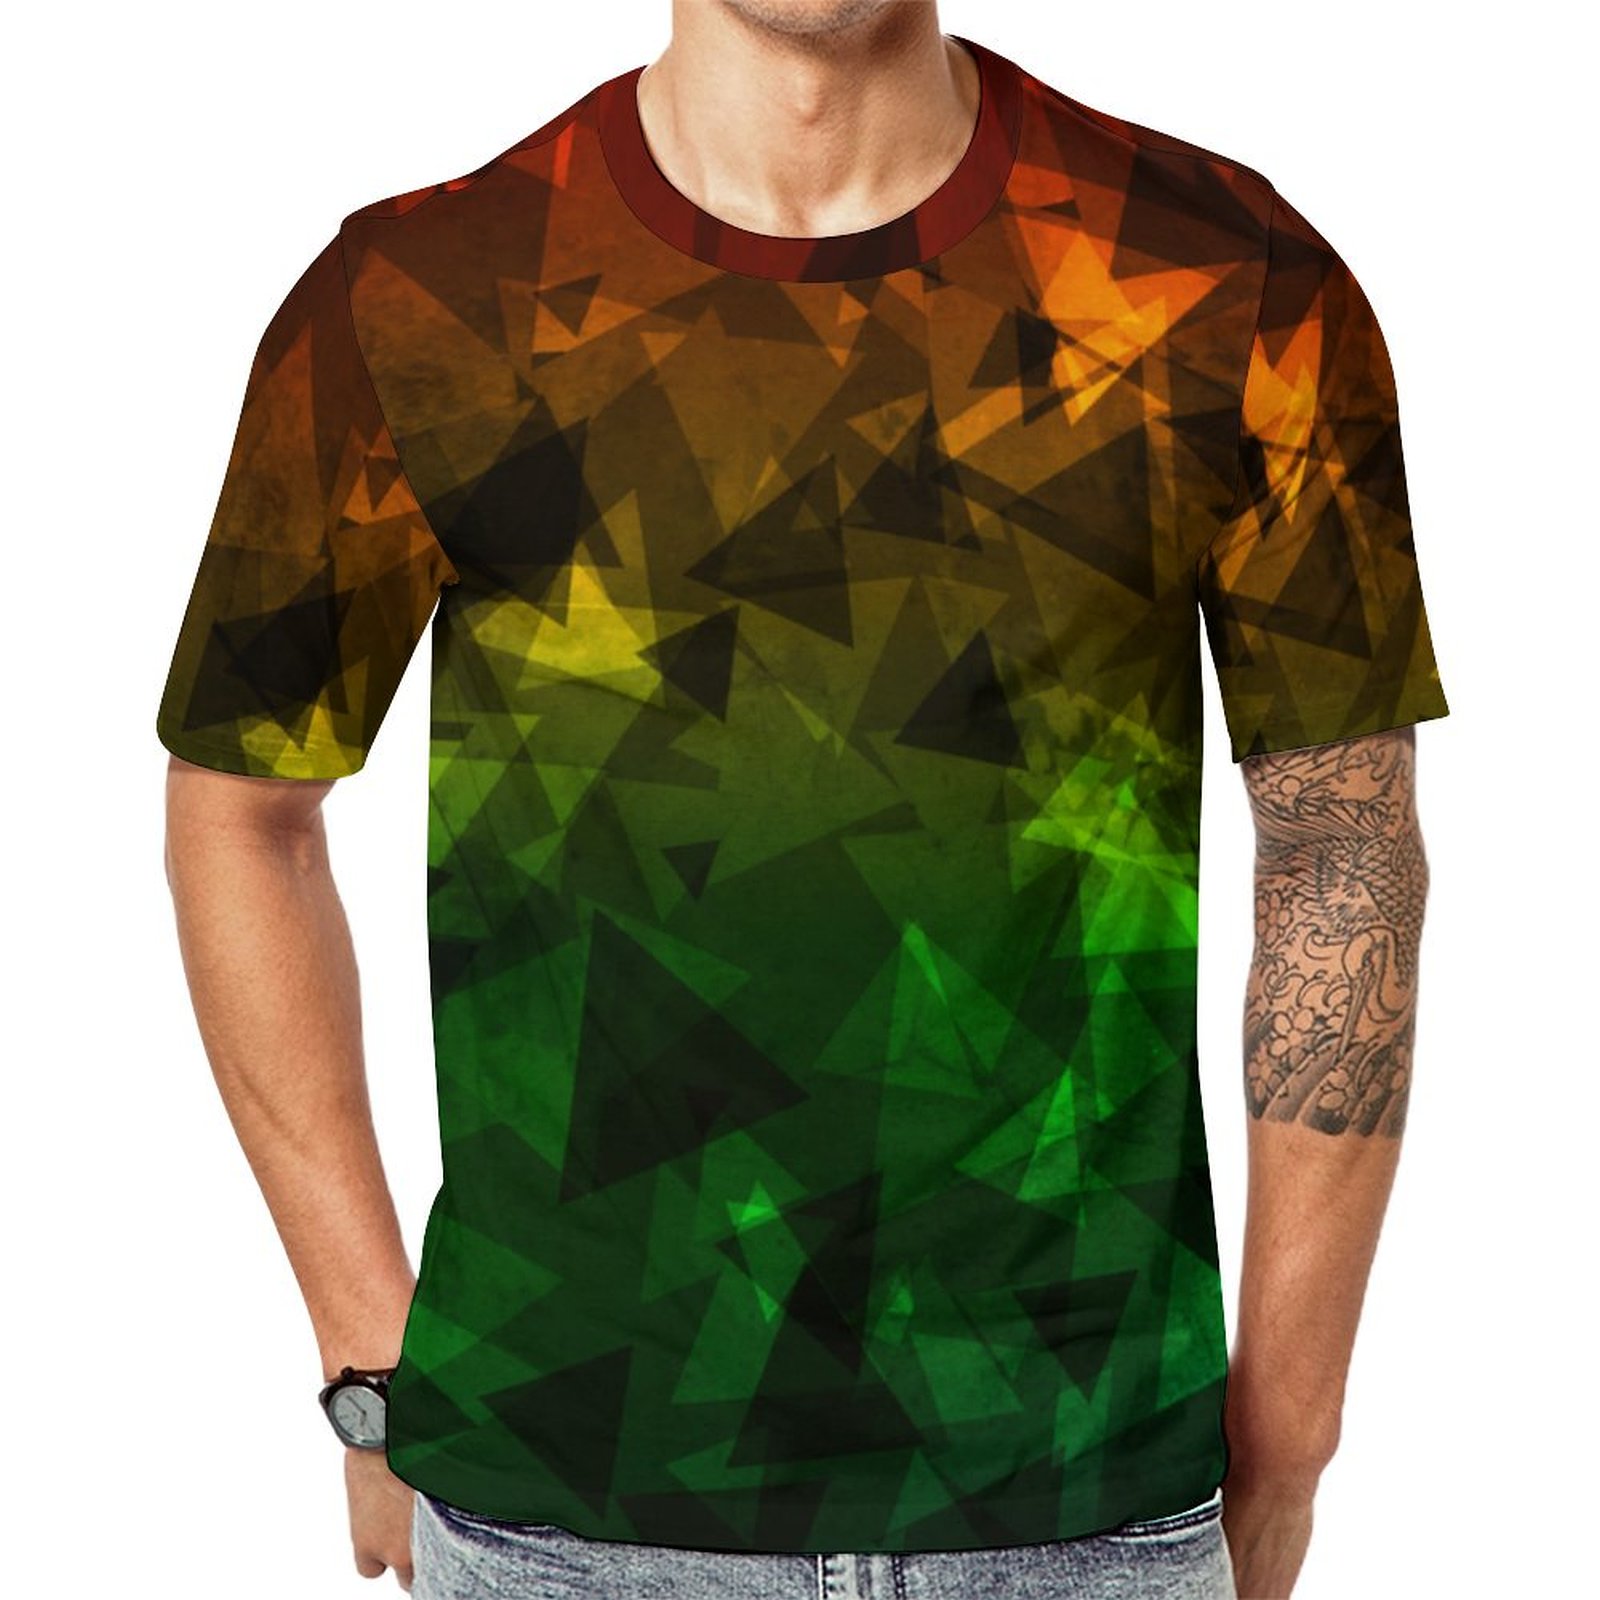 Green Yellow Red Triangle Short Sleeve Print Unisex Tshirt Summer Casual Tees for Men and Women Coolcoshirts